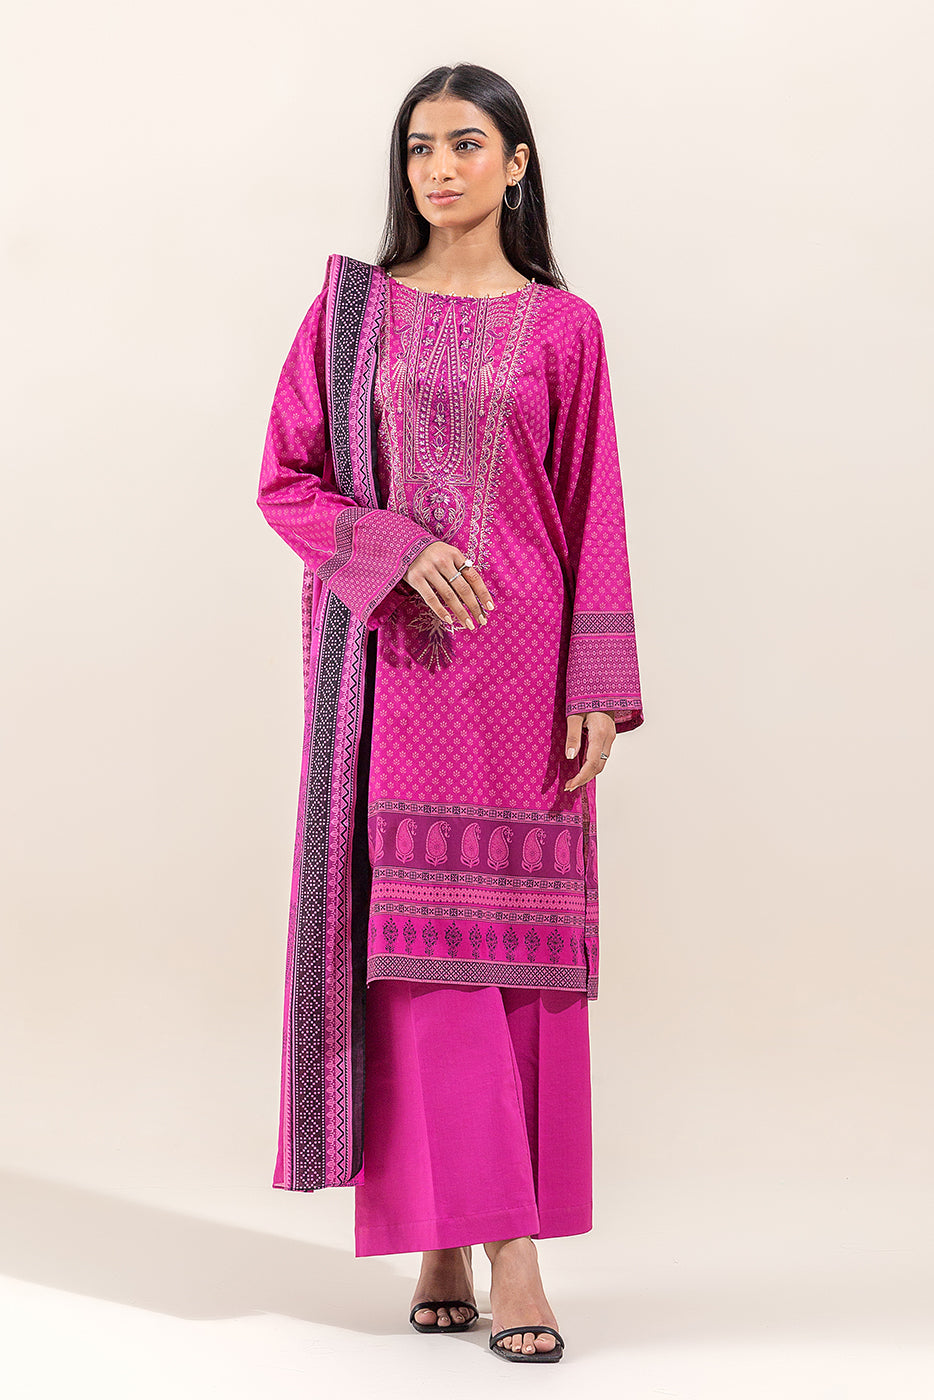 3 PIECE EMBROIDERED LAWN SUIT-RASPBERRY SORBET (UNSTITCHED)